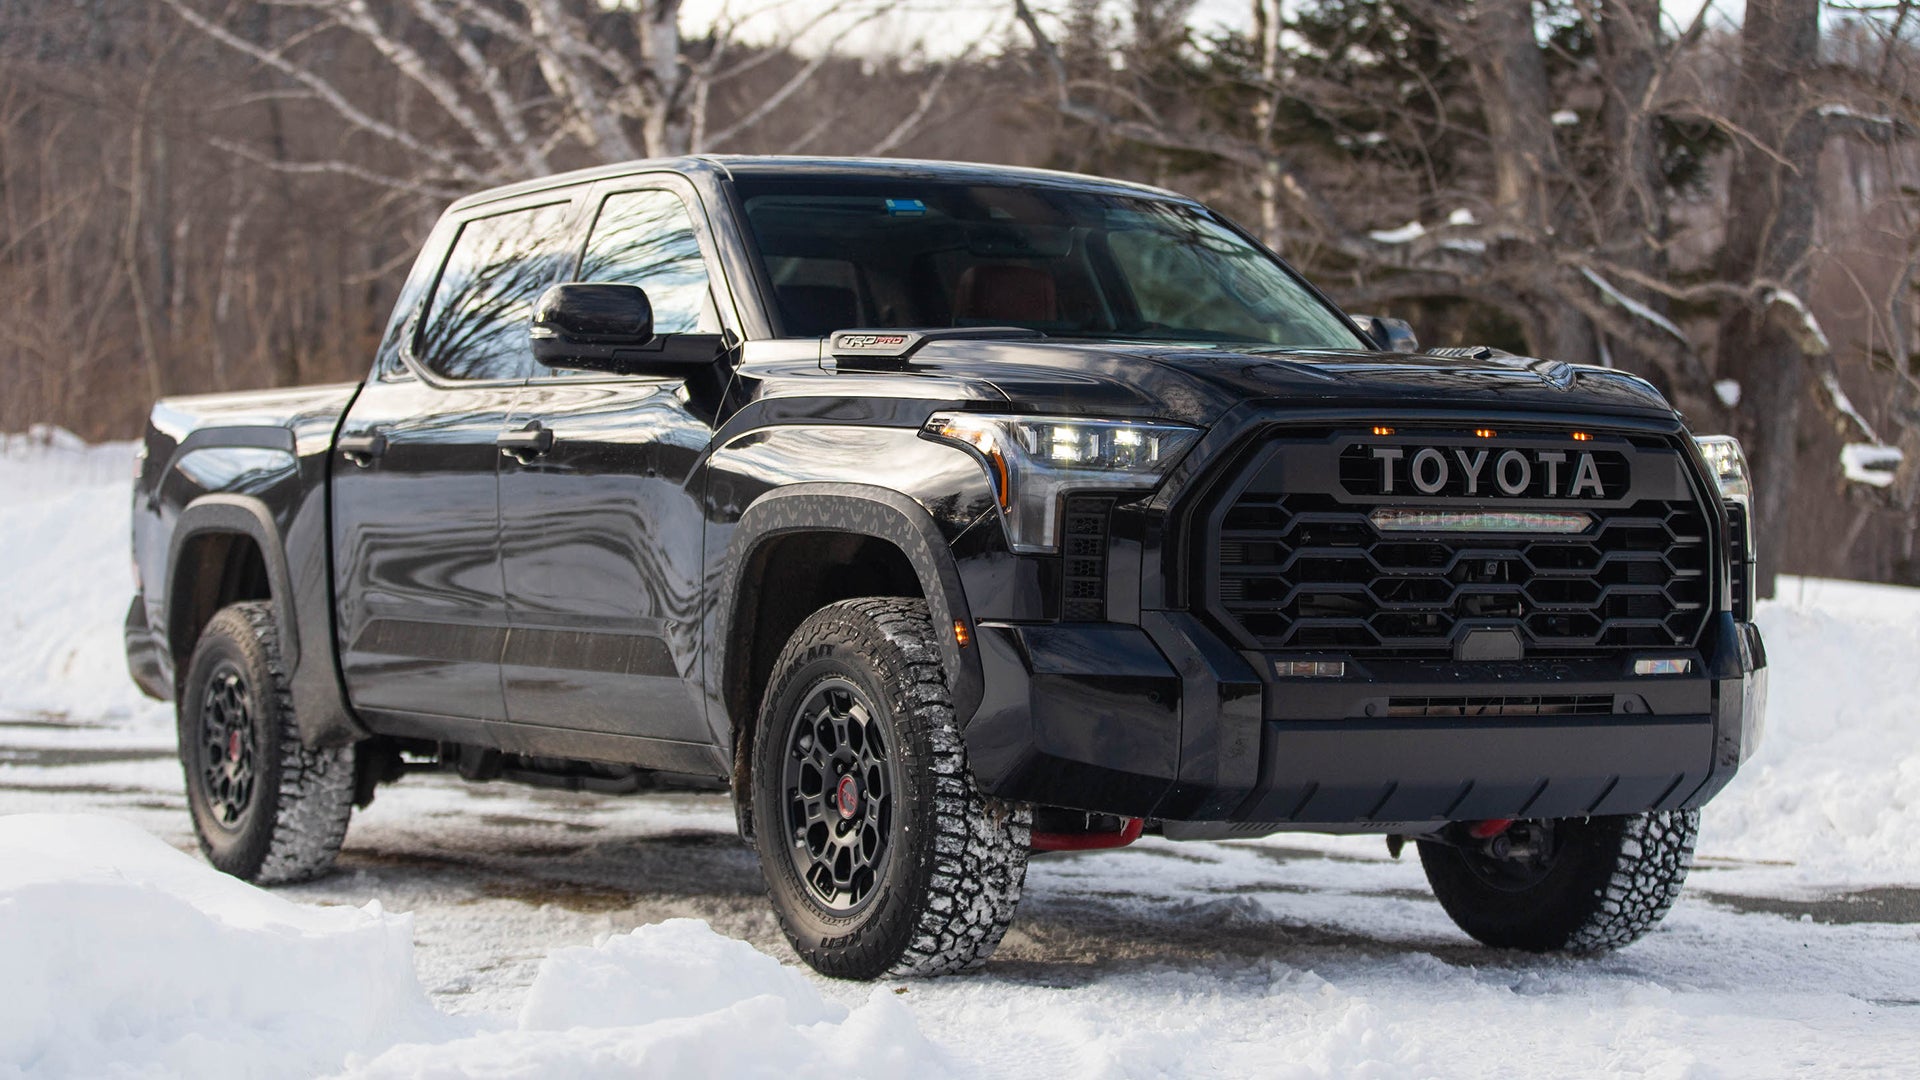 2022 Toyota Tundra TRD Pro Review: The Aggro Hybrid Pickup